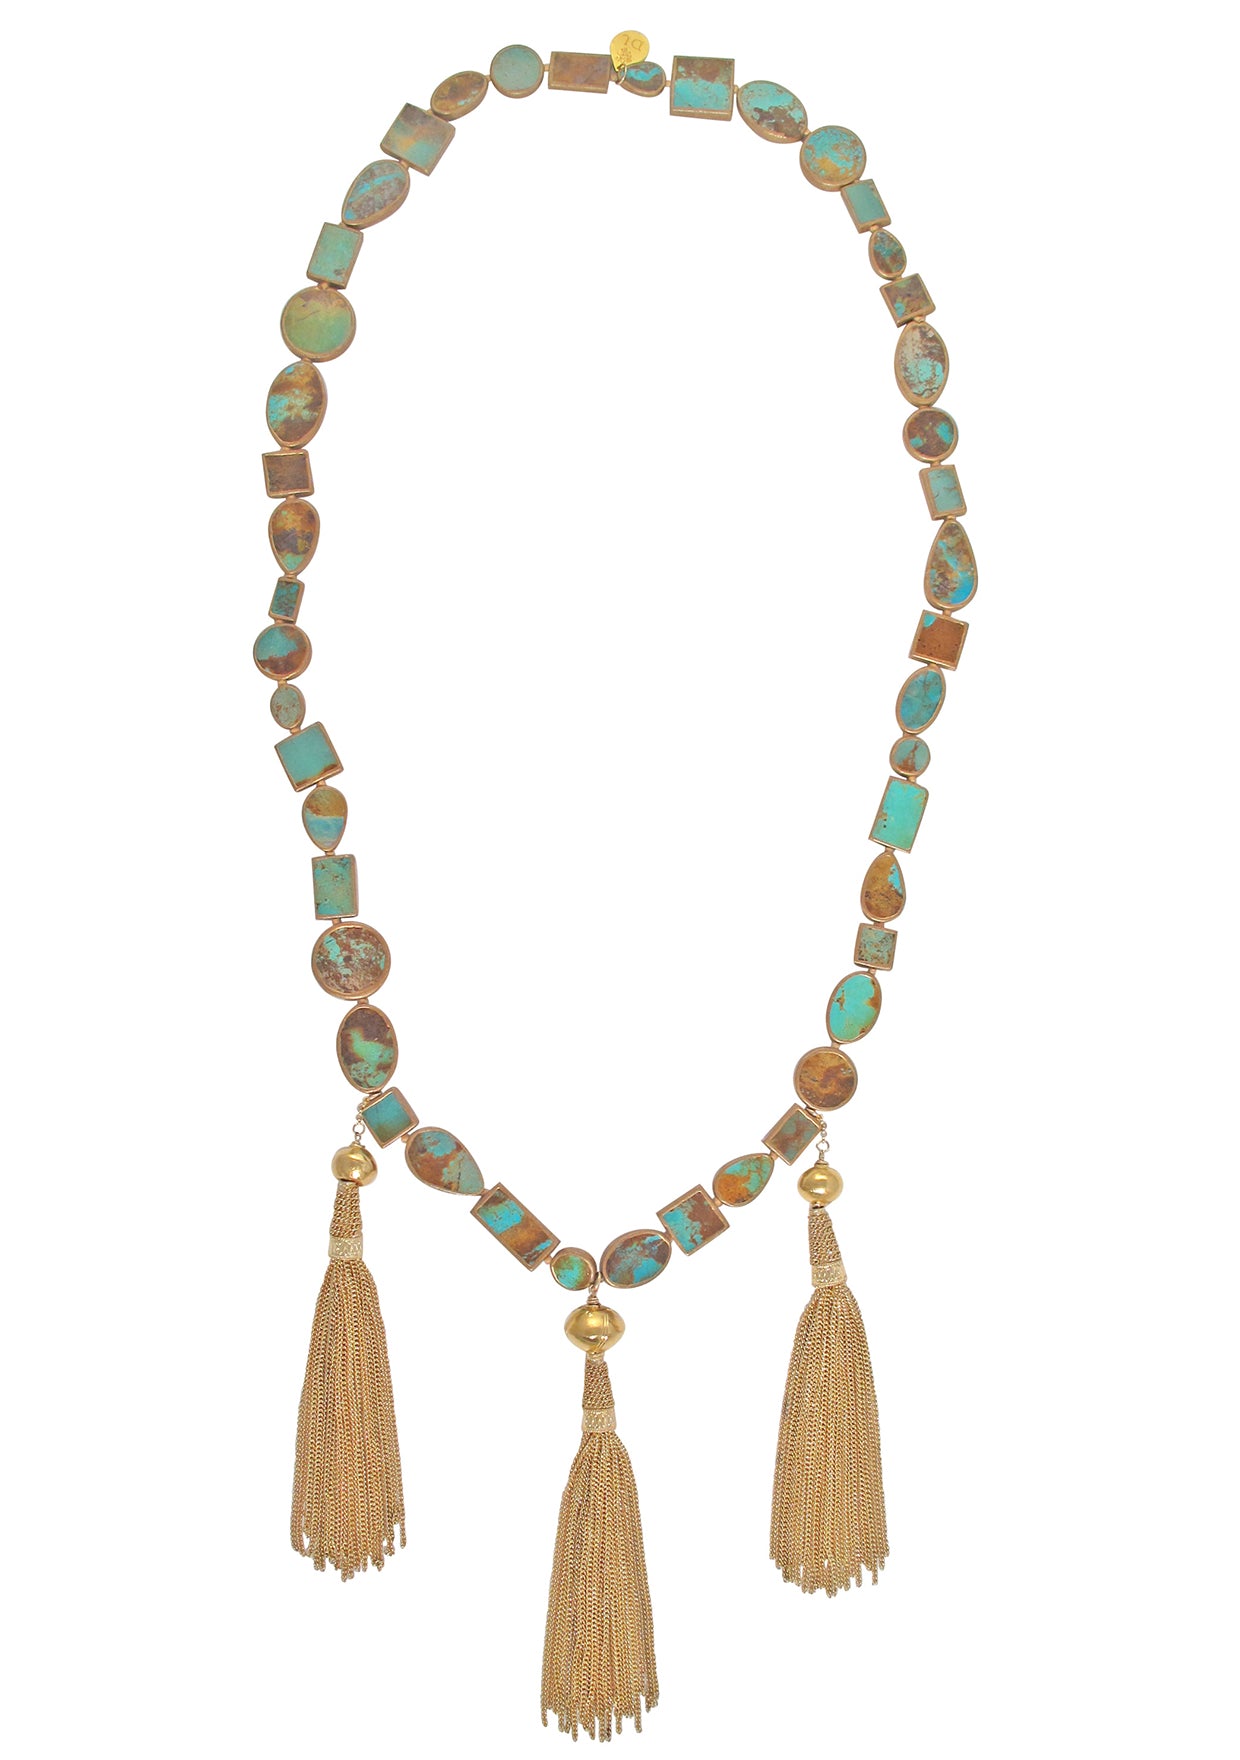 Cooper Infused Turquoise Gold Tassel Necklace – Devon Leigh Jewelry